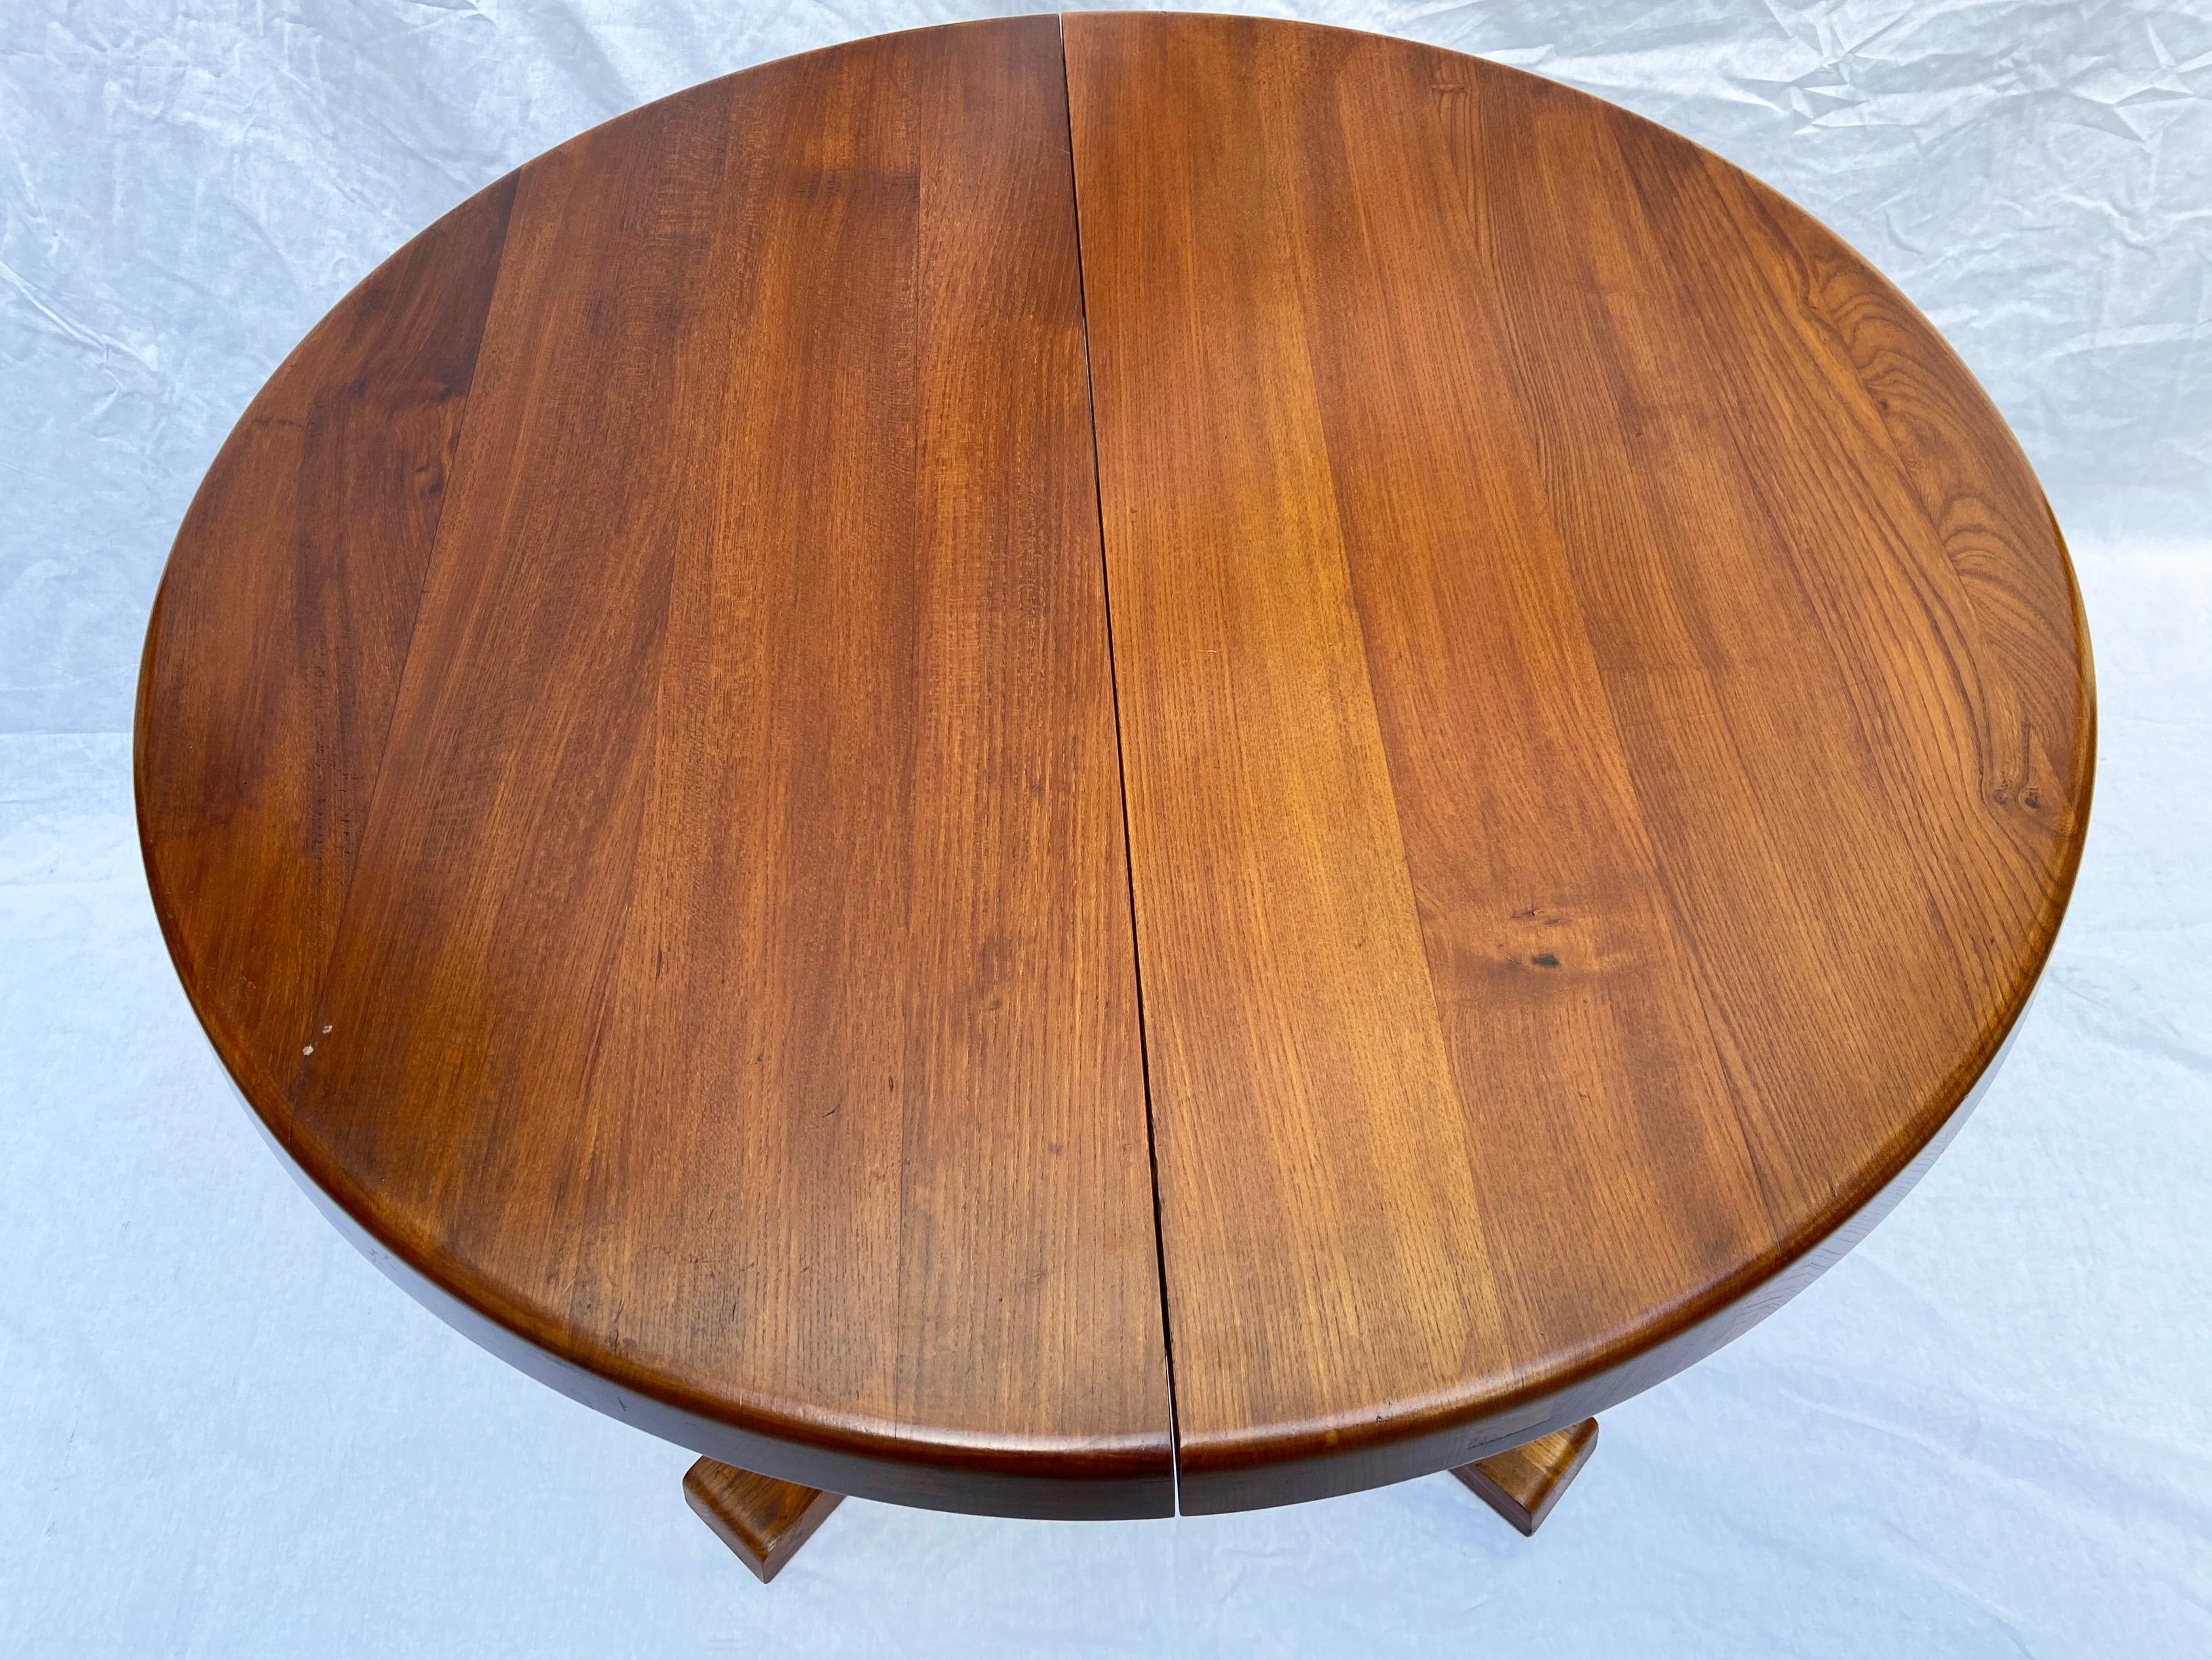 Table T40 - Canard feet- Pierre Chapo 
Circular table with 2 central extensions 
Solid elm 
Circa 1978
Without extension: D 96 x H 74
With 2 extensions: W 196 x 96 x H 74
With 1 extension leaf : L 146 x 96 x H 74
In very good vintage condition